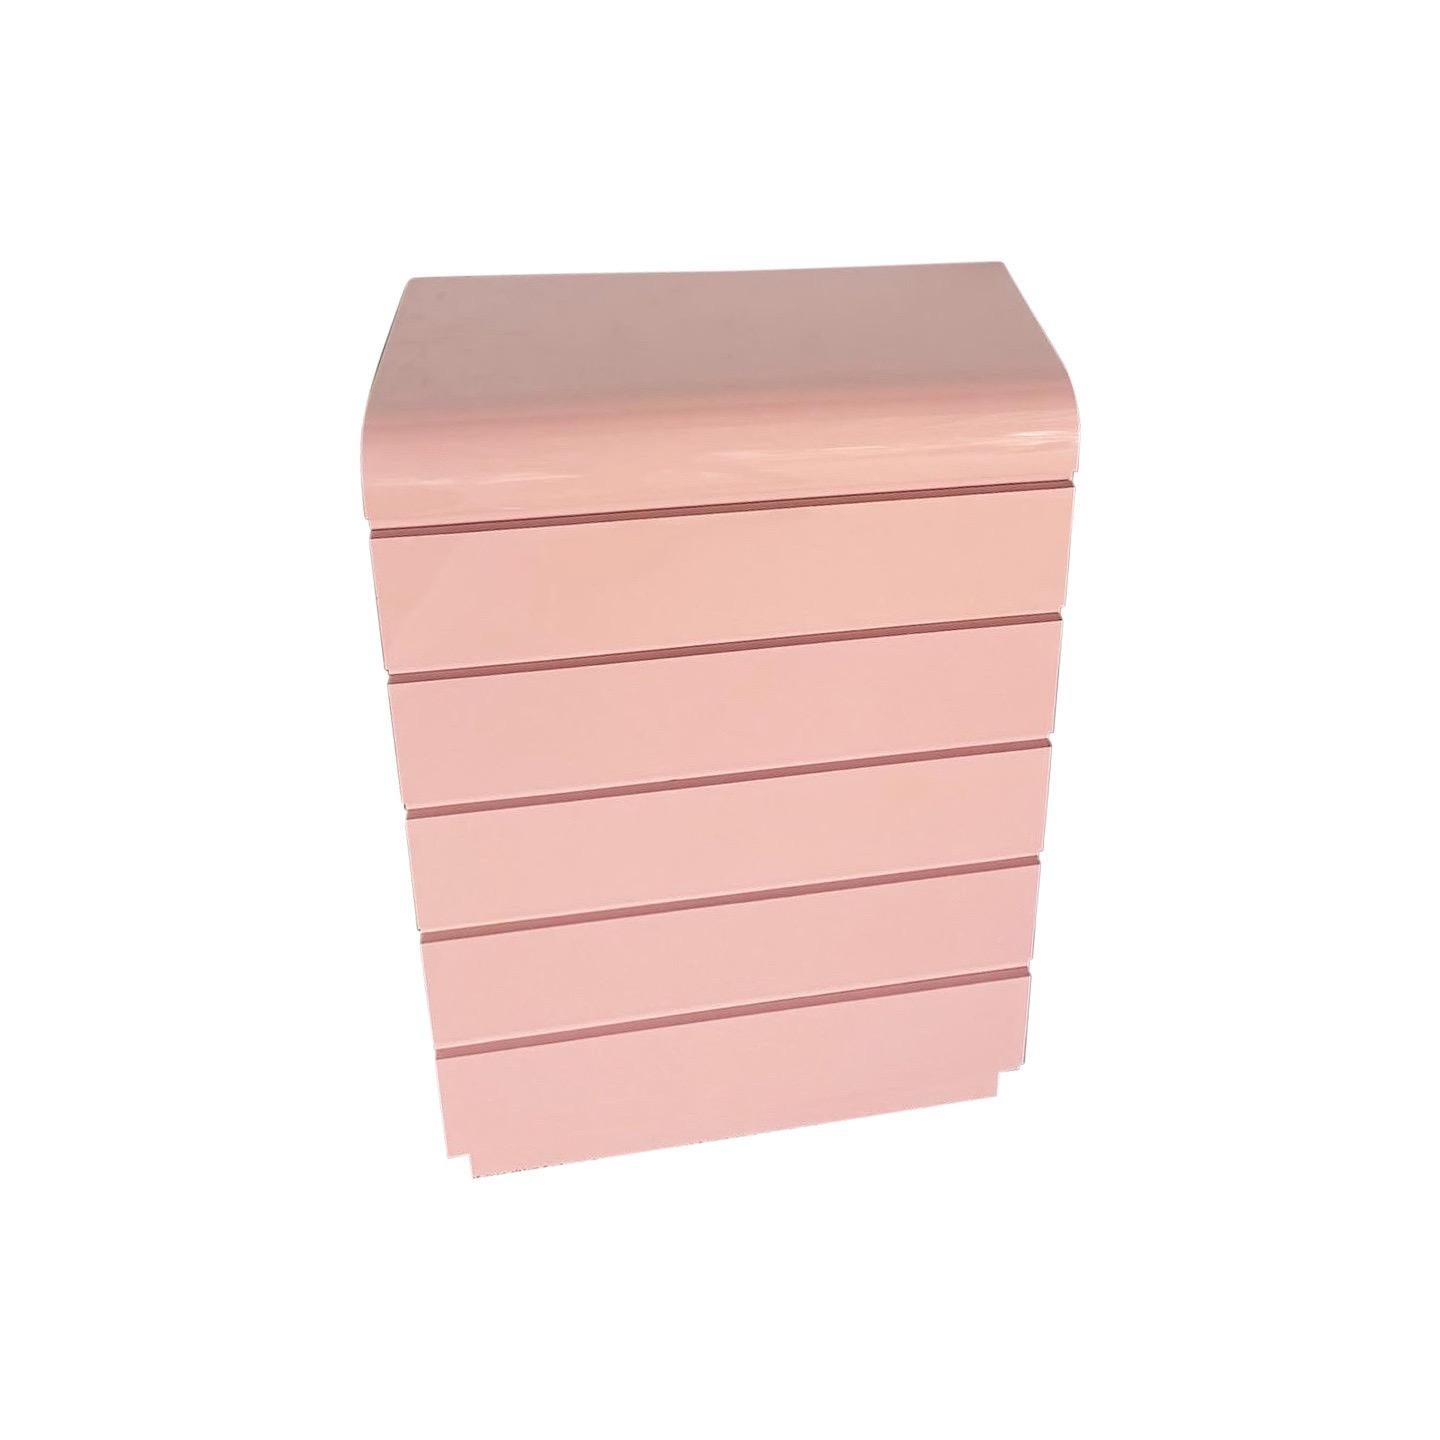 Elevate your space with this Postmodern Pink Lacquer Waterfall Highboy Dresser, featuring a bold pink hue and seamless waterfall design for a striking, contemporary look. A bold statement piece that combines style with functionality.